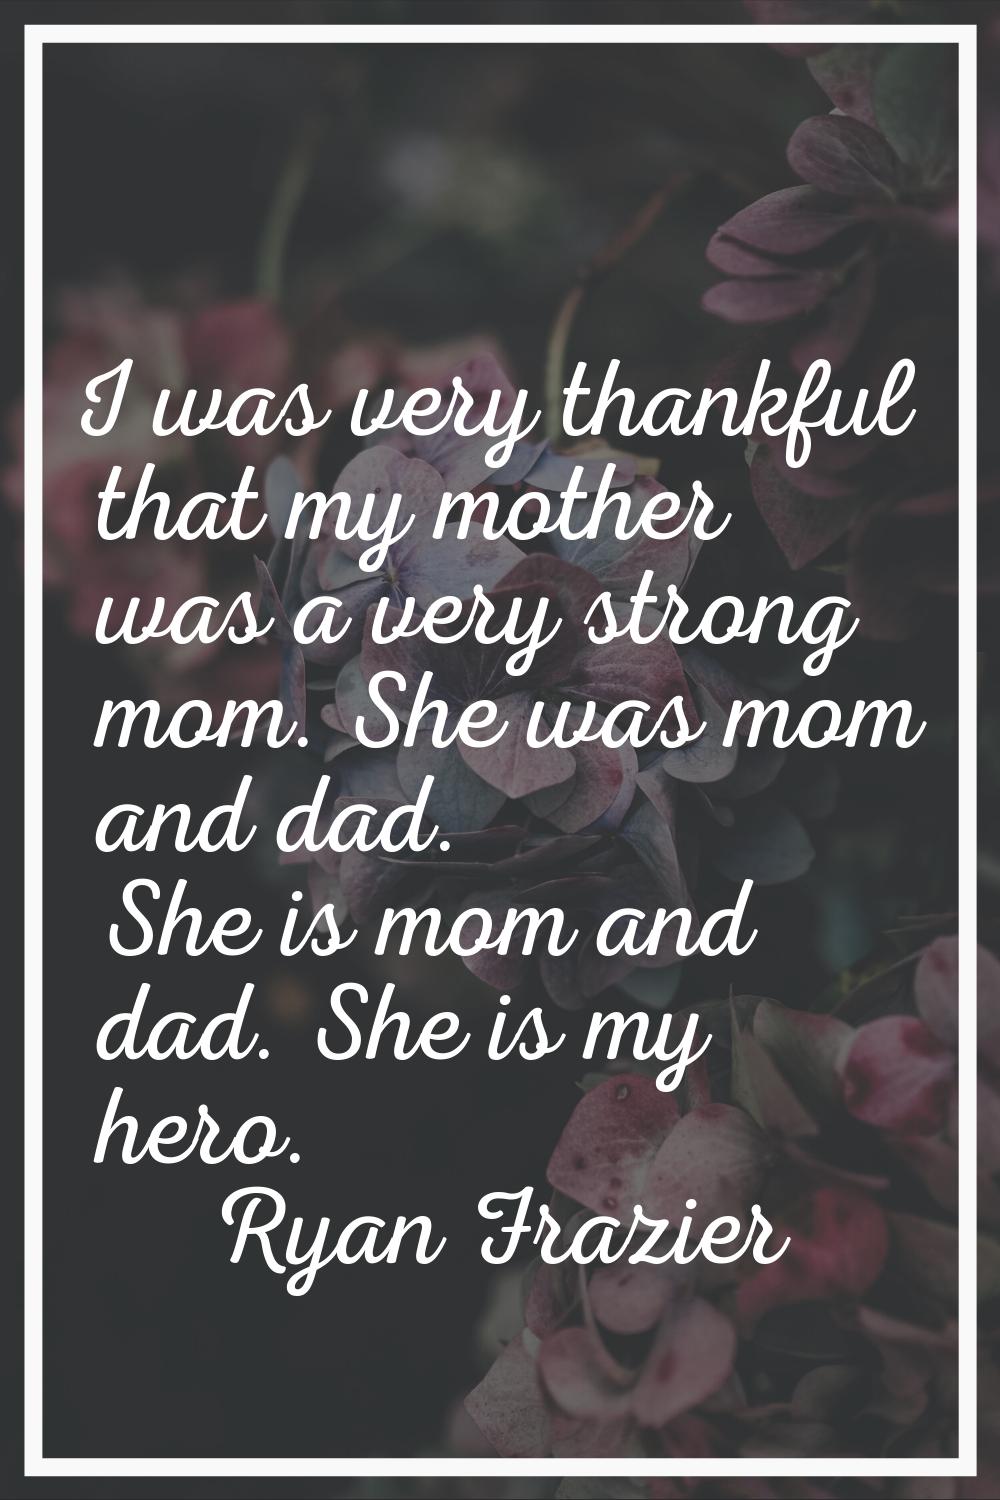 I was very thankful that my mother was a very strong mom. She was mom and dad. She is mom and dad. 